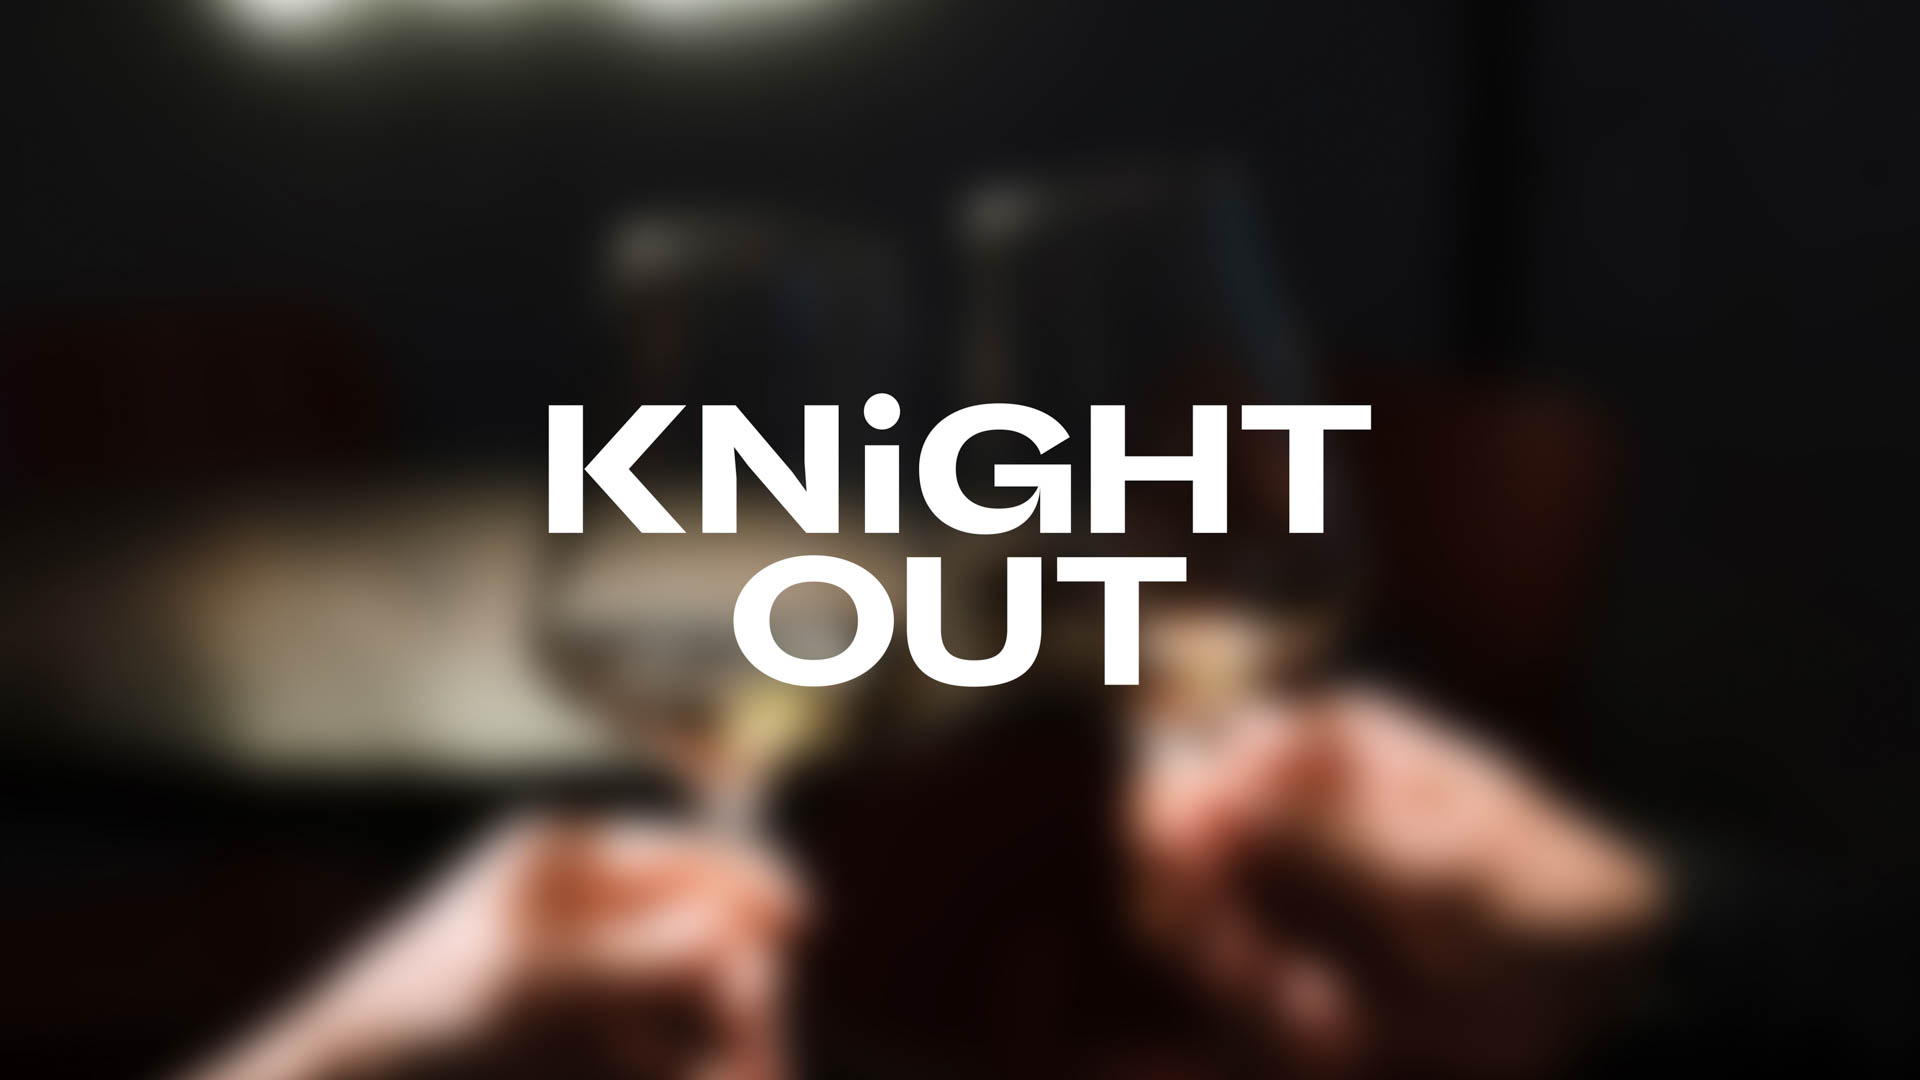 the knight out logo against a blurry background